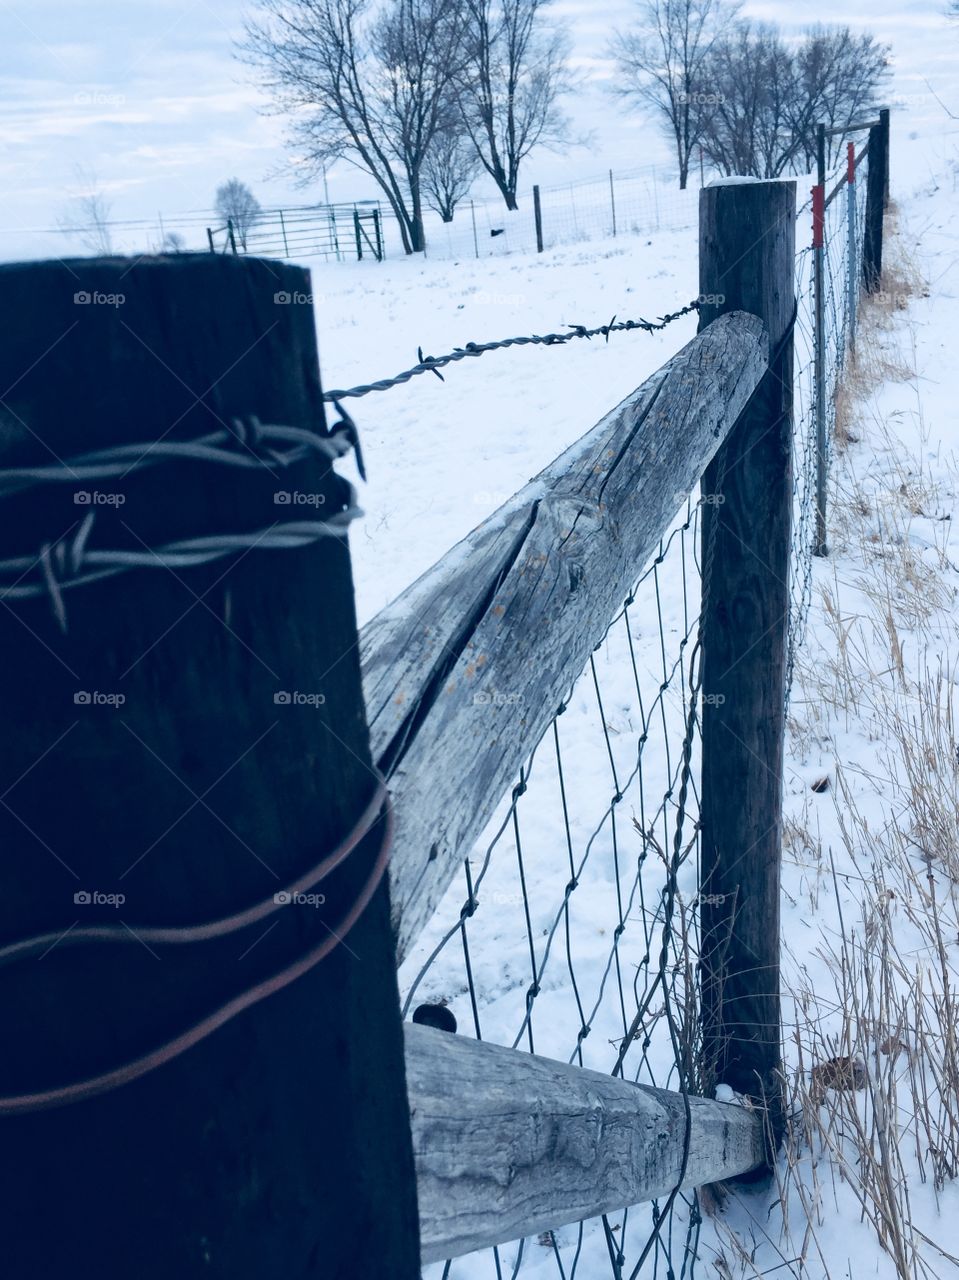 Angled view of barbed-wire-wrapped fence posts and wire fencing around a cattle pasture in winter